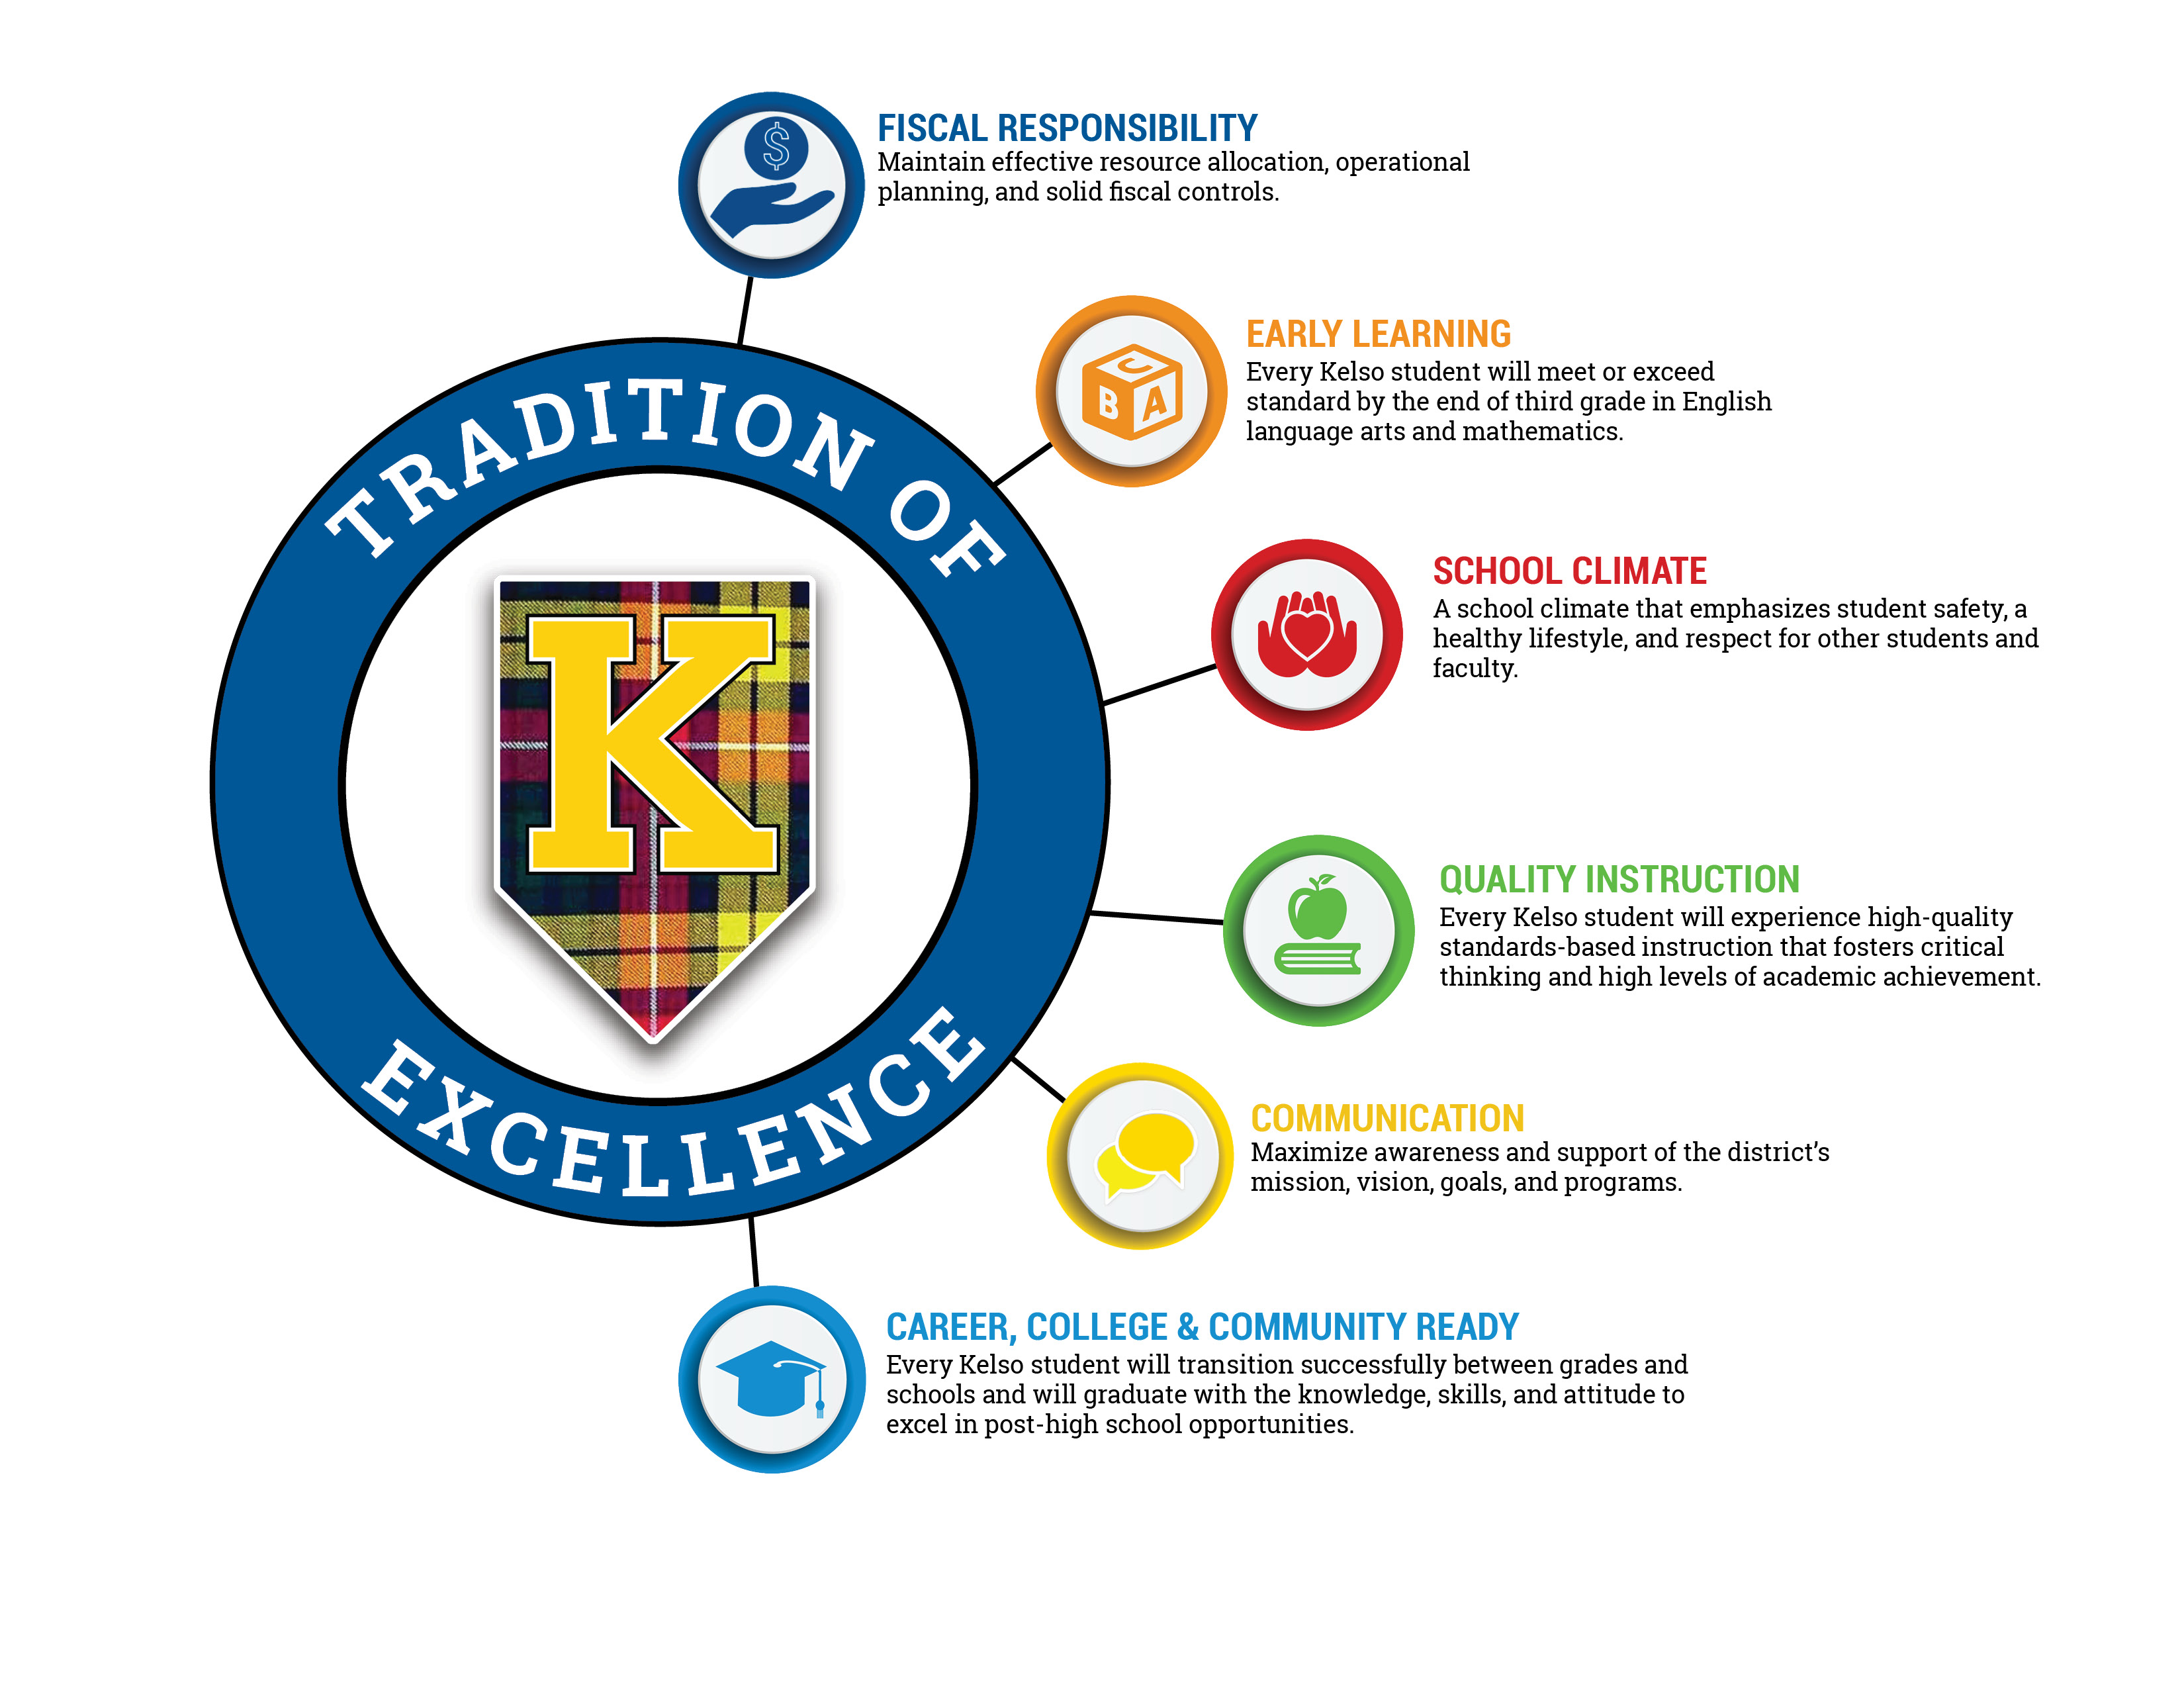 tradition of excellence